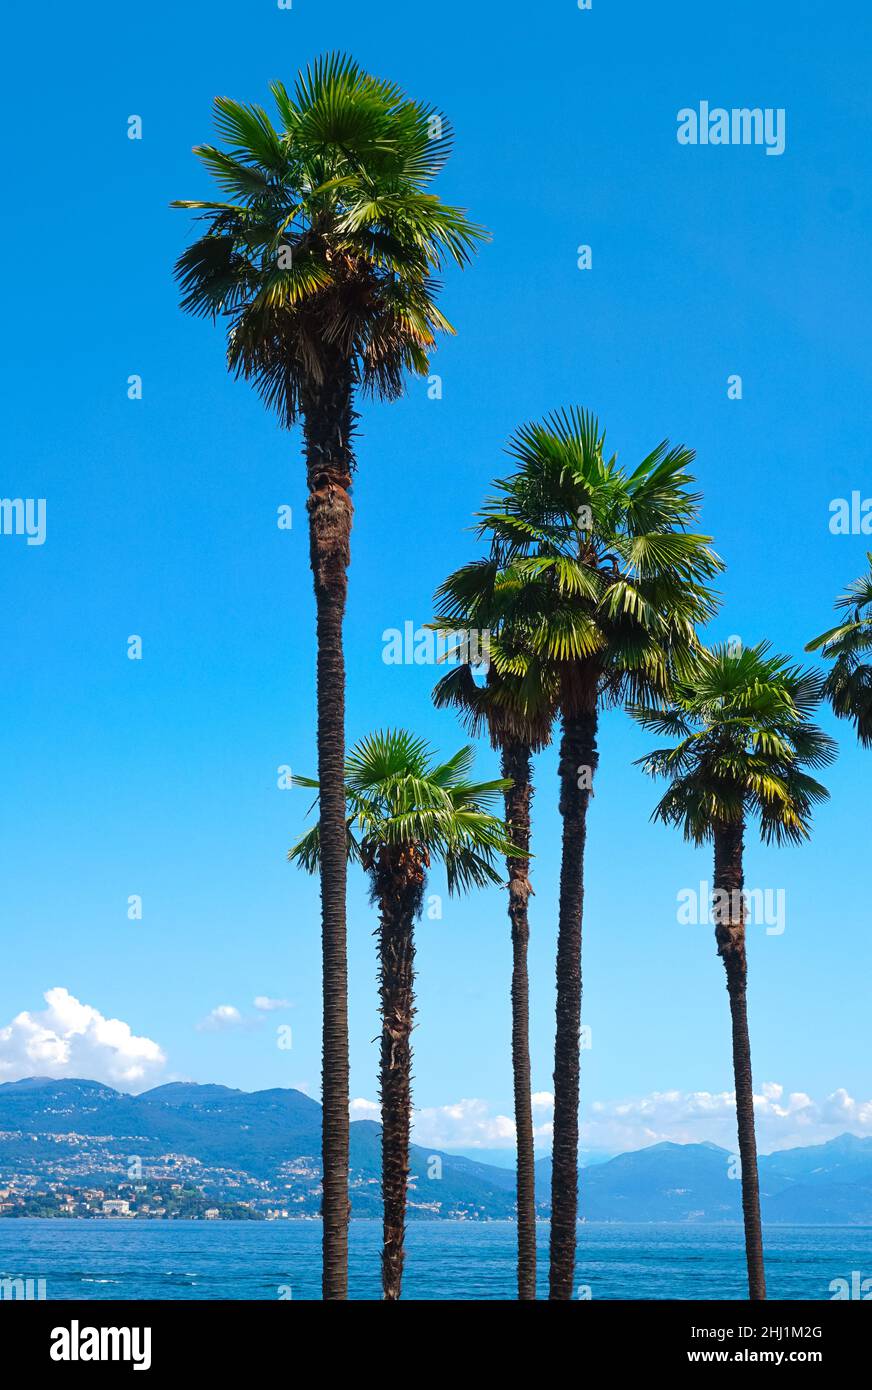 Palm trees against a bright blue sky and a summer landscape Stock Photo